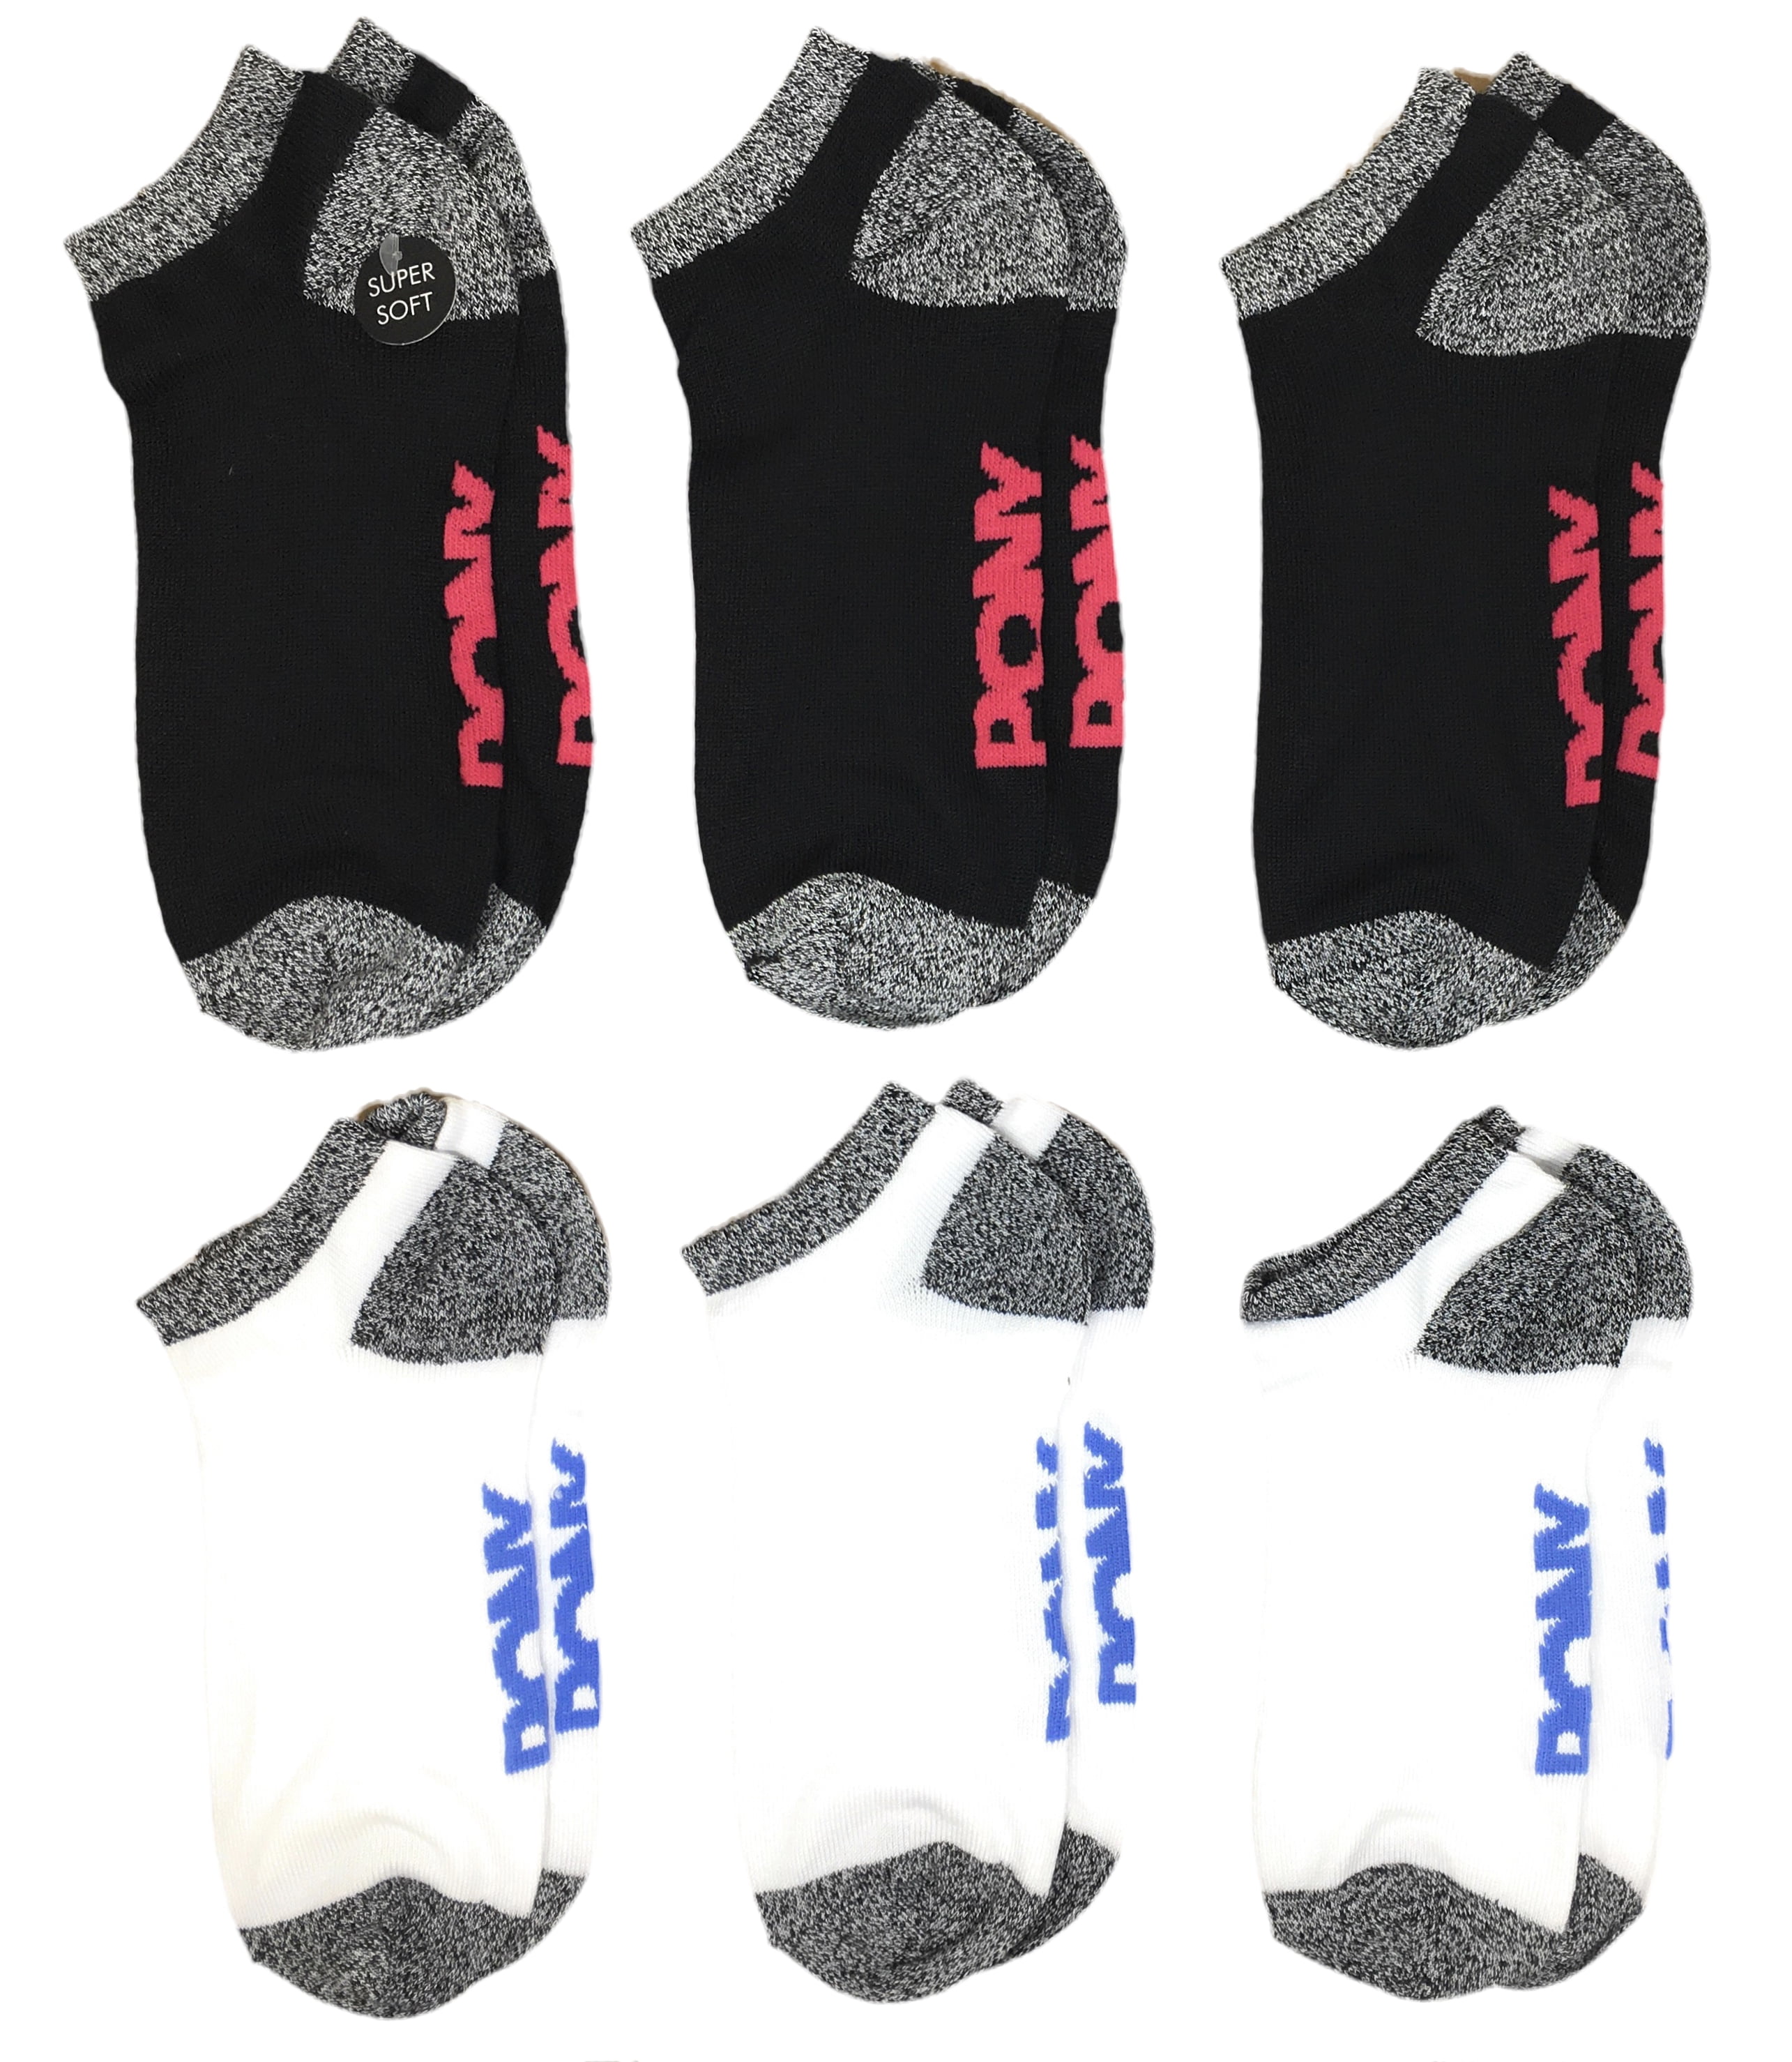 Pony Ladies 6-Pack Low Cuts Socks, Sock Size 9-11, Shoe Size 5-10, Group A  - (3) Black and (3) White with Grey Heels & Toes - Walmart.com